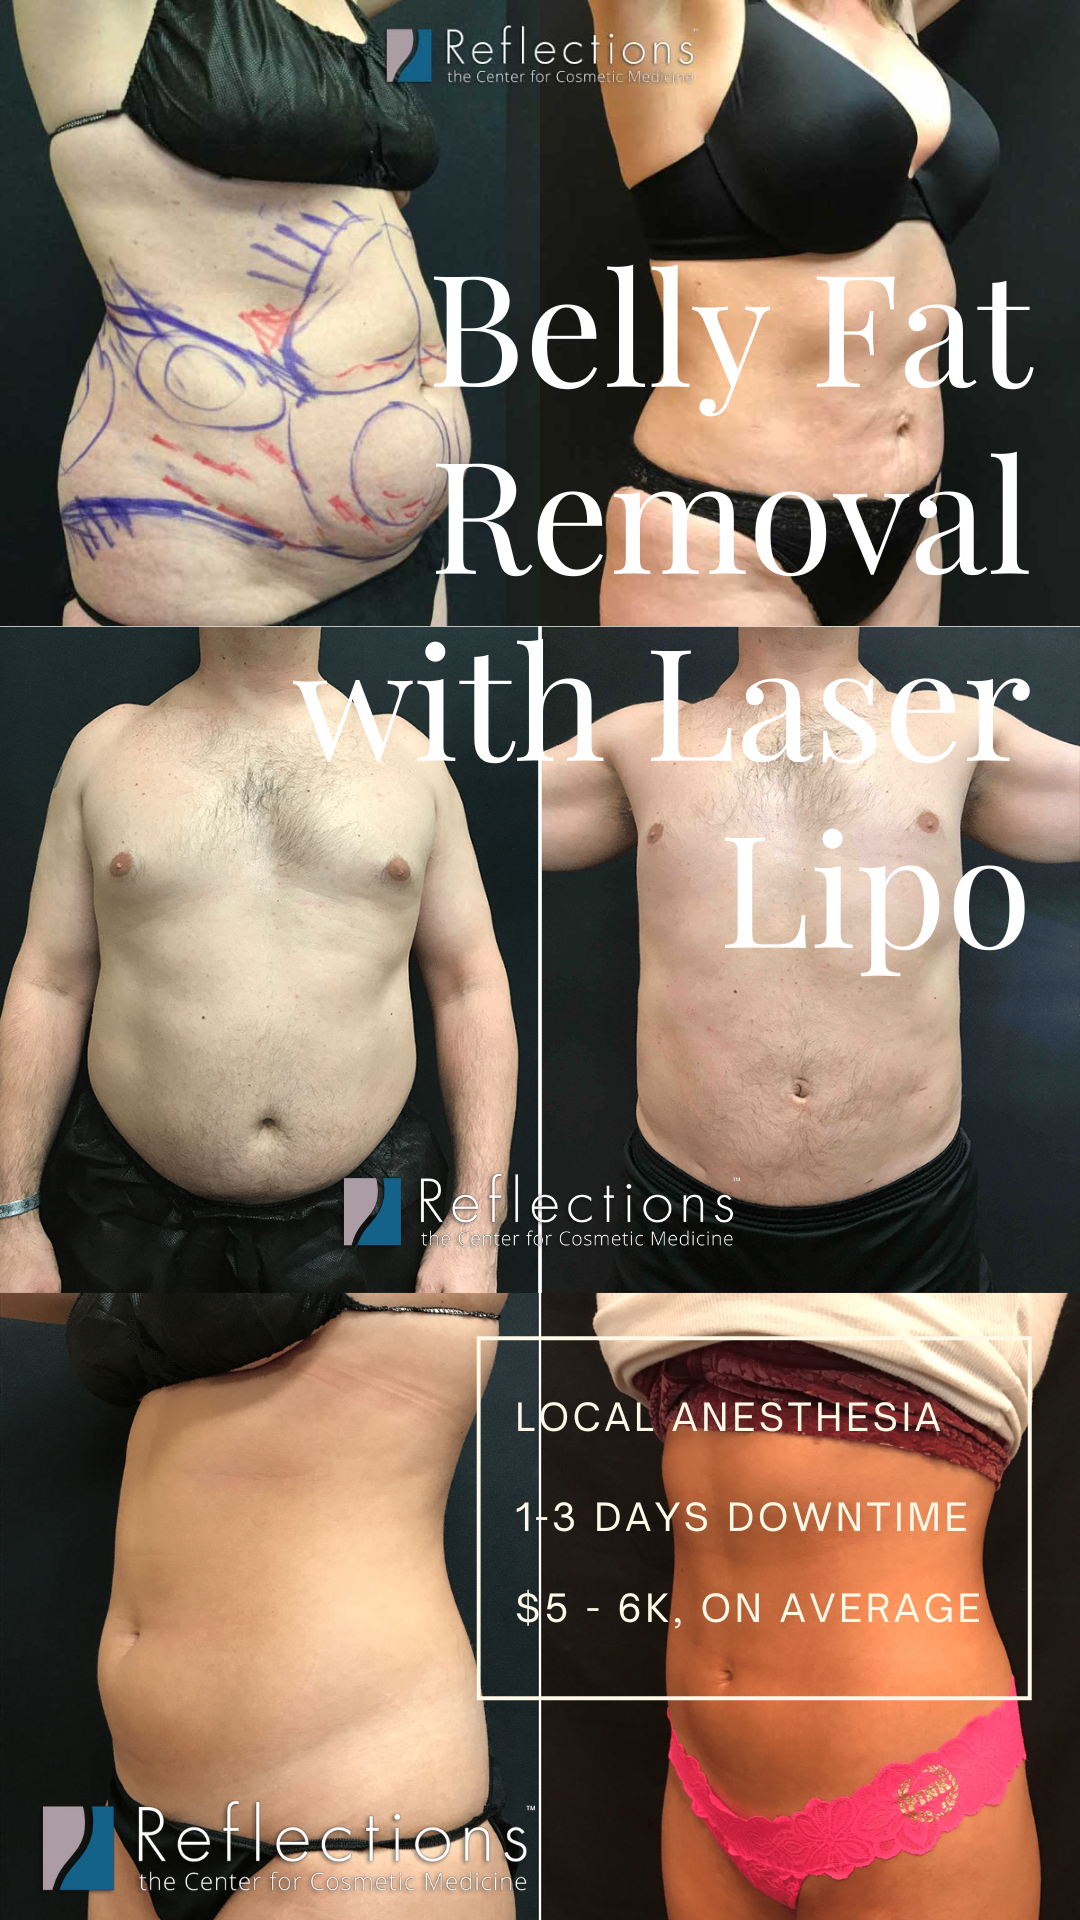 Achieving a Flatter Stomach with Lipolysis Injections